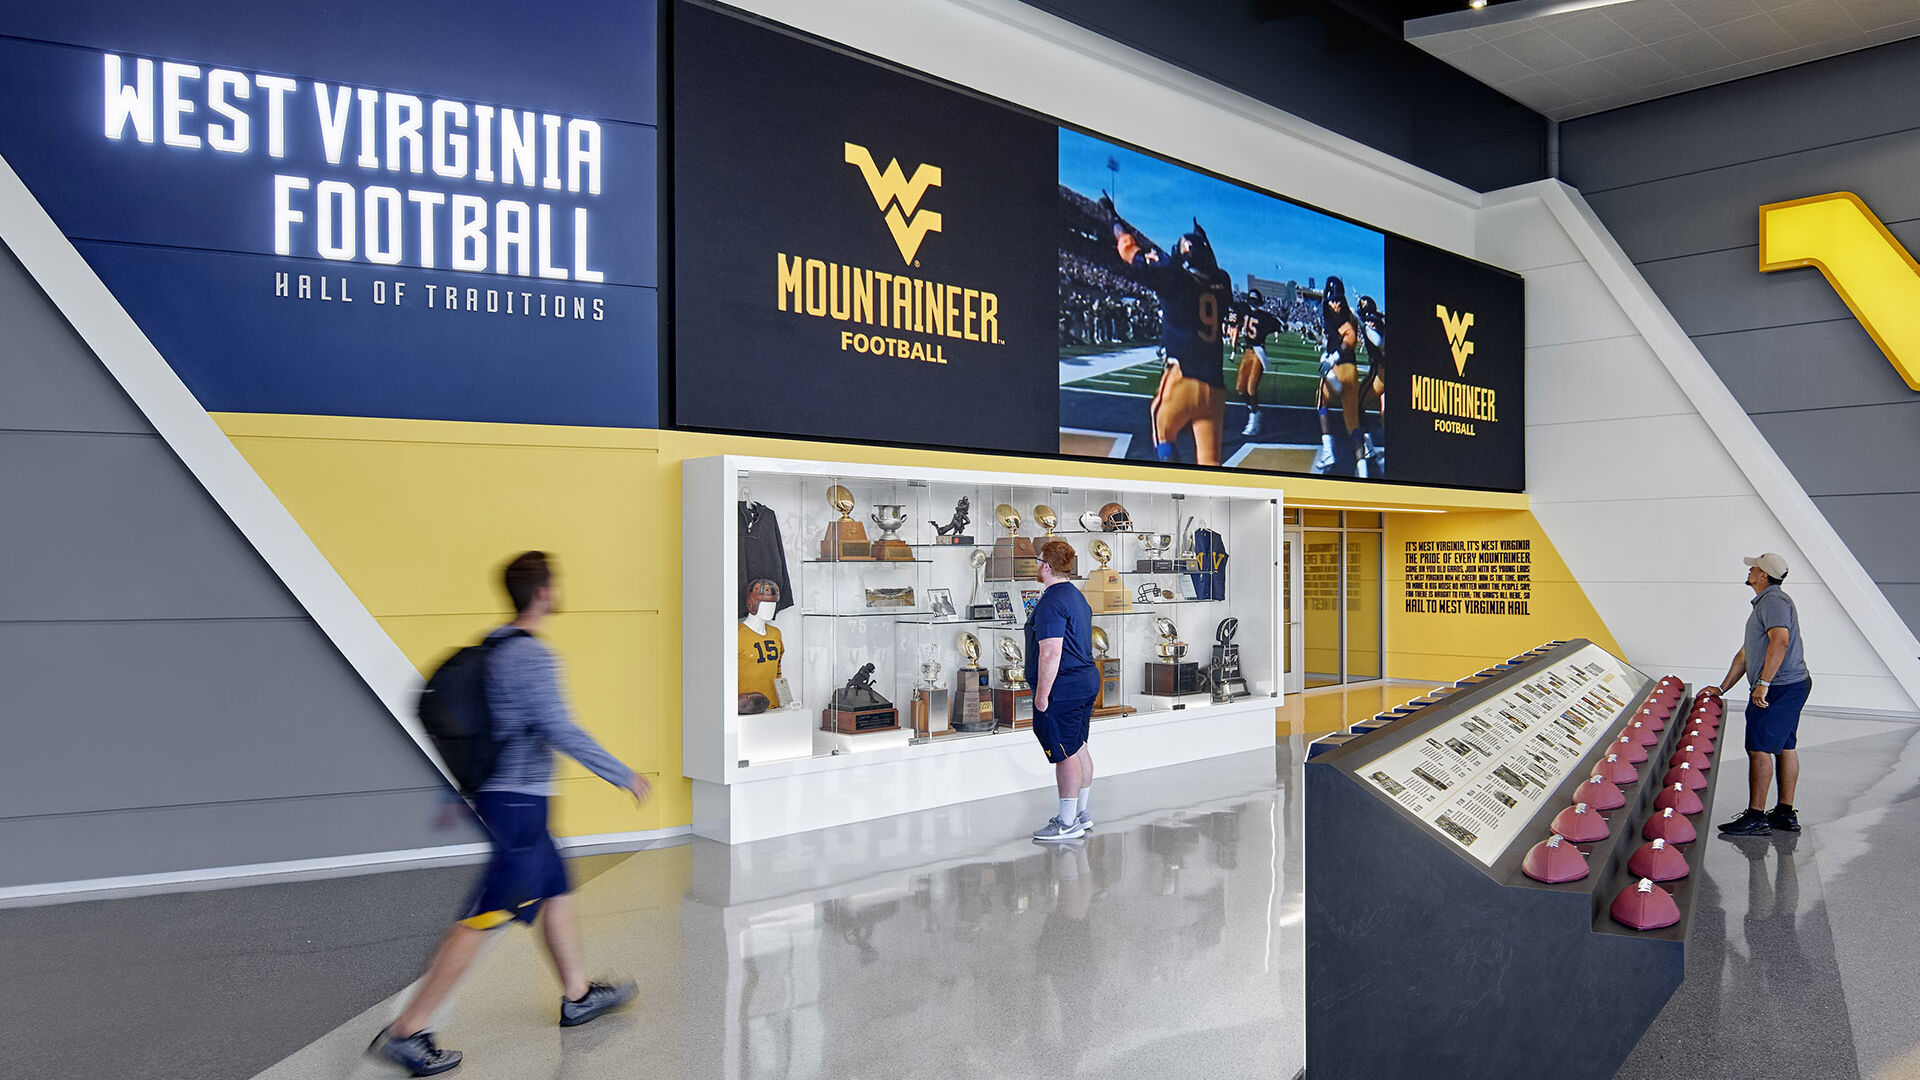 Students look at displays in the West Virginia Football Hall of Traditions